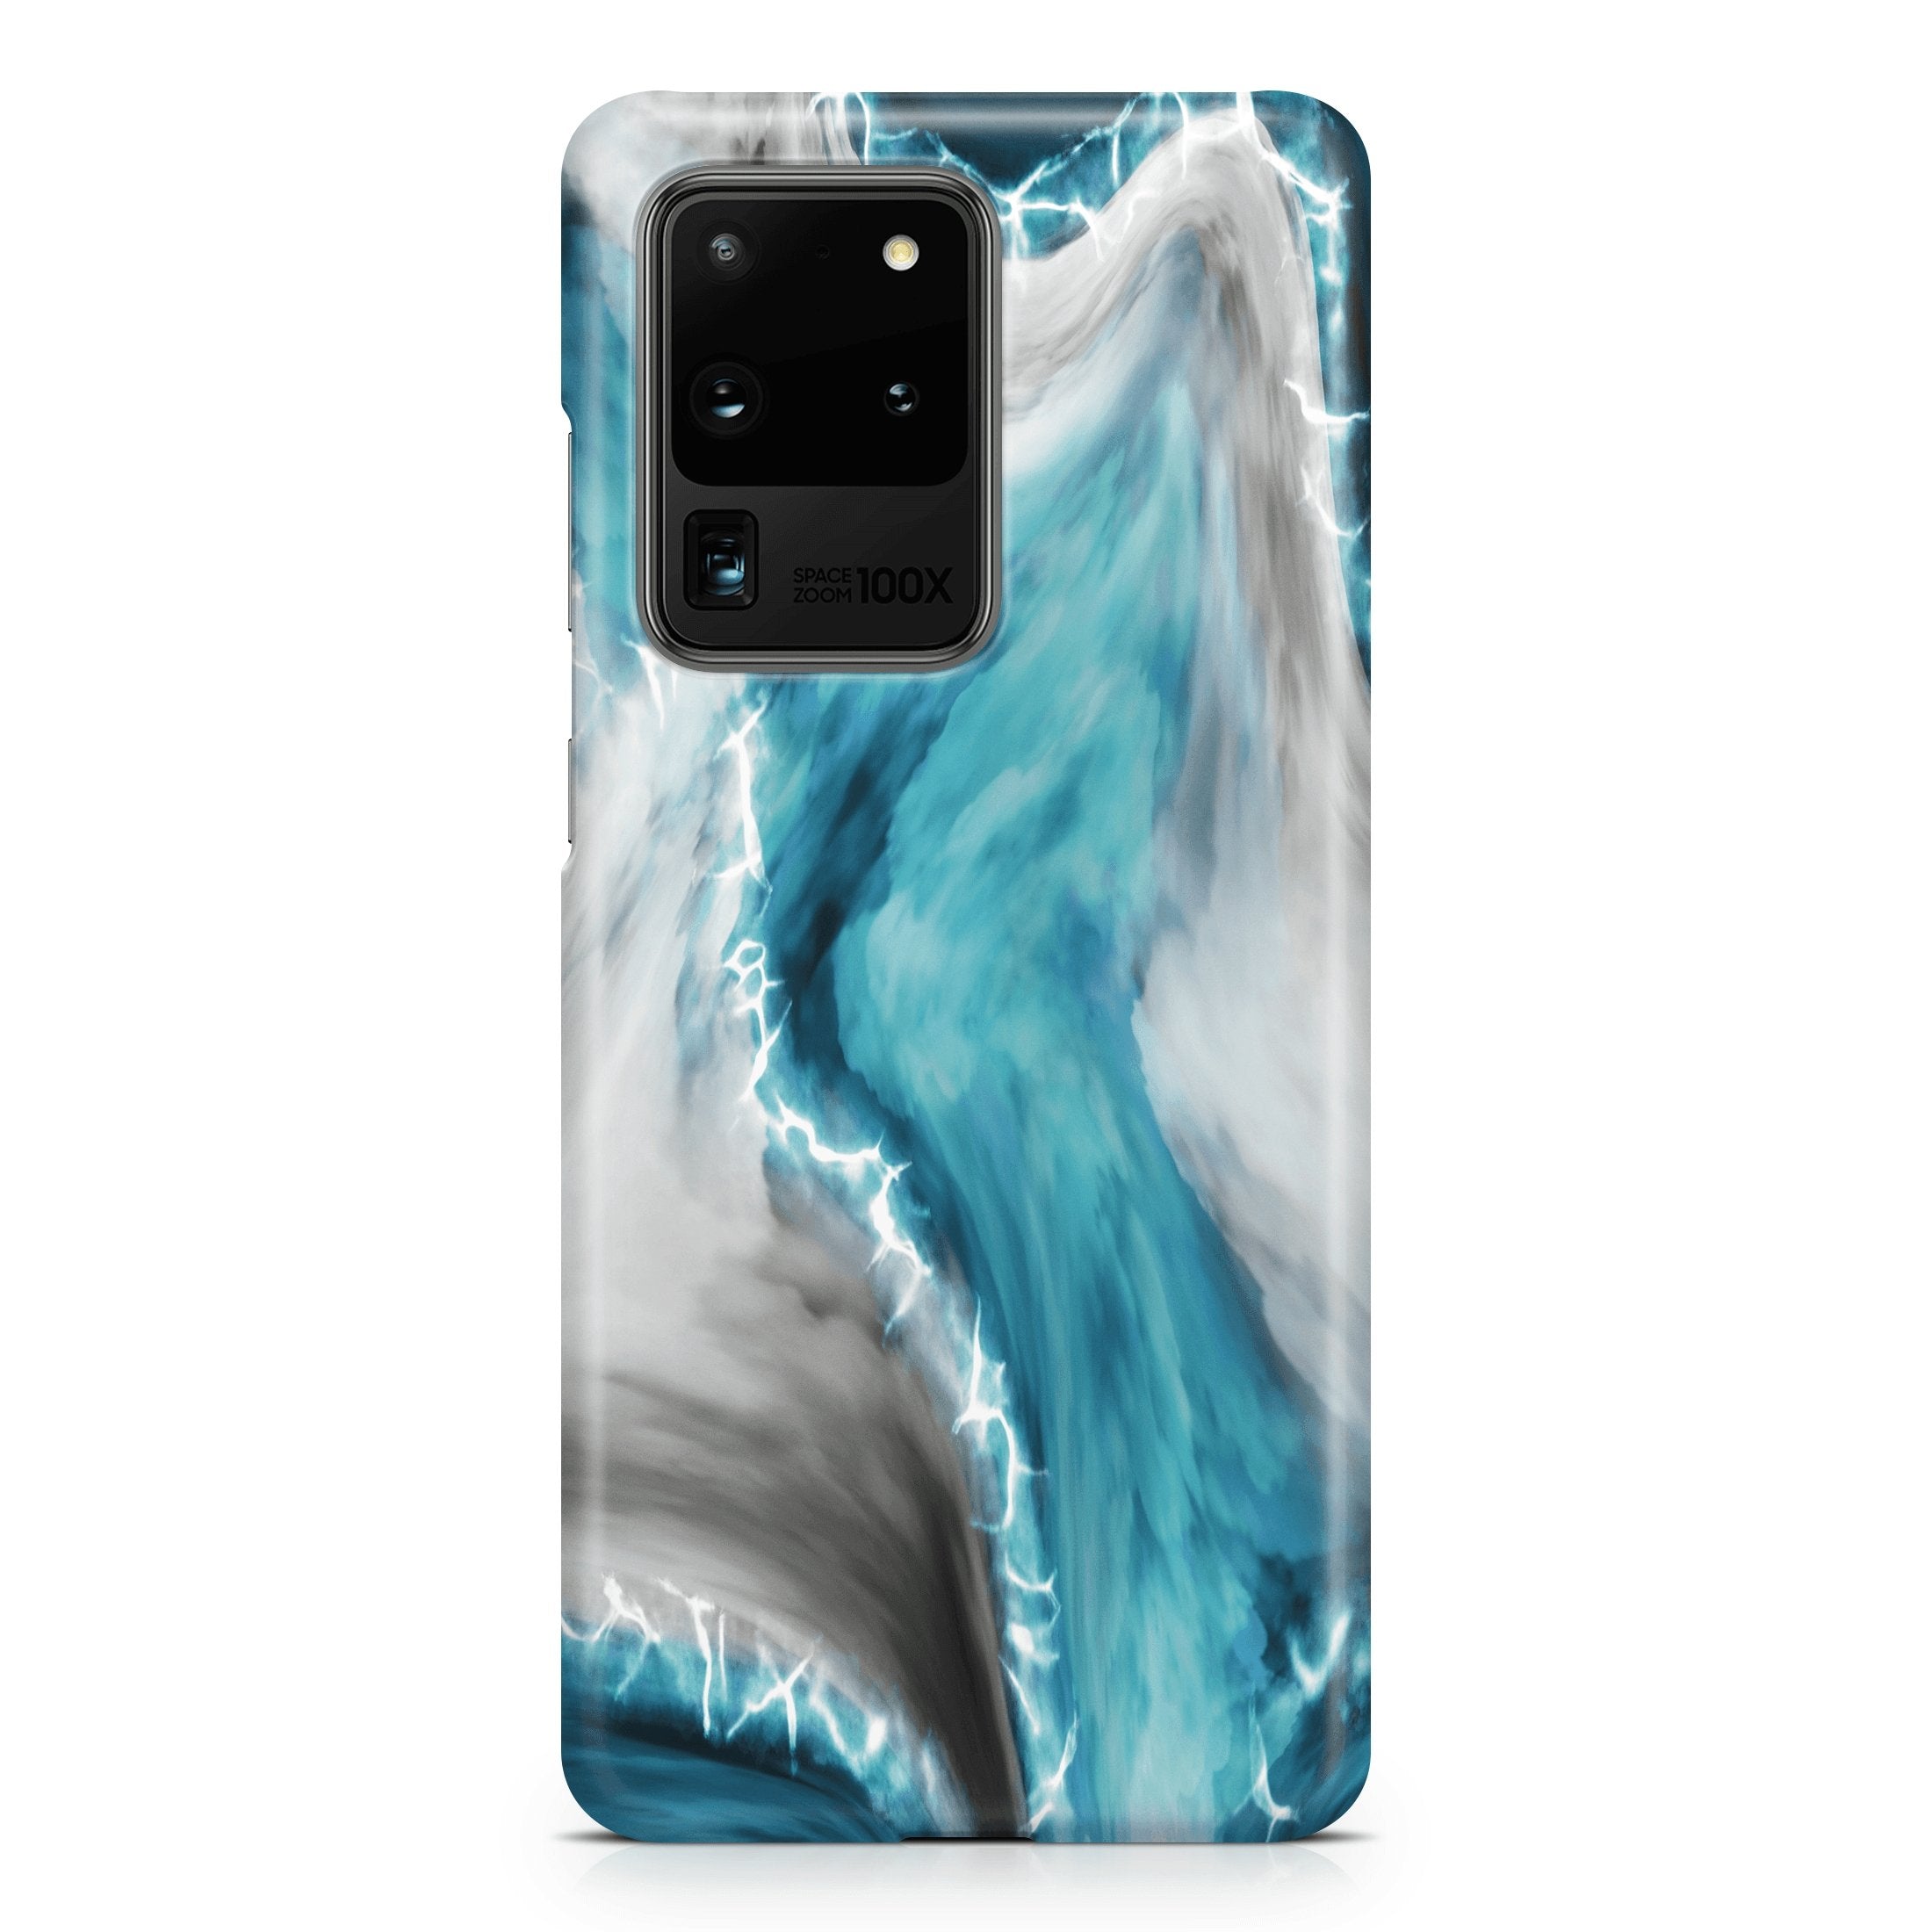 Cracked Ice - Samsung phone case designs by CaseSwagger